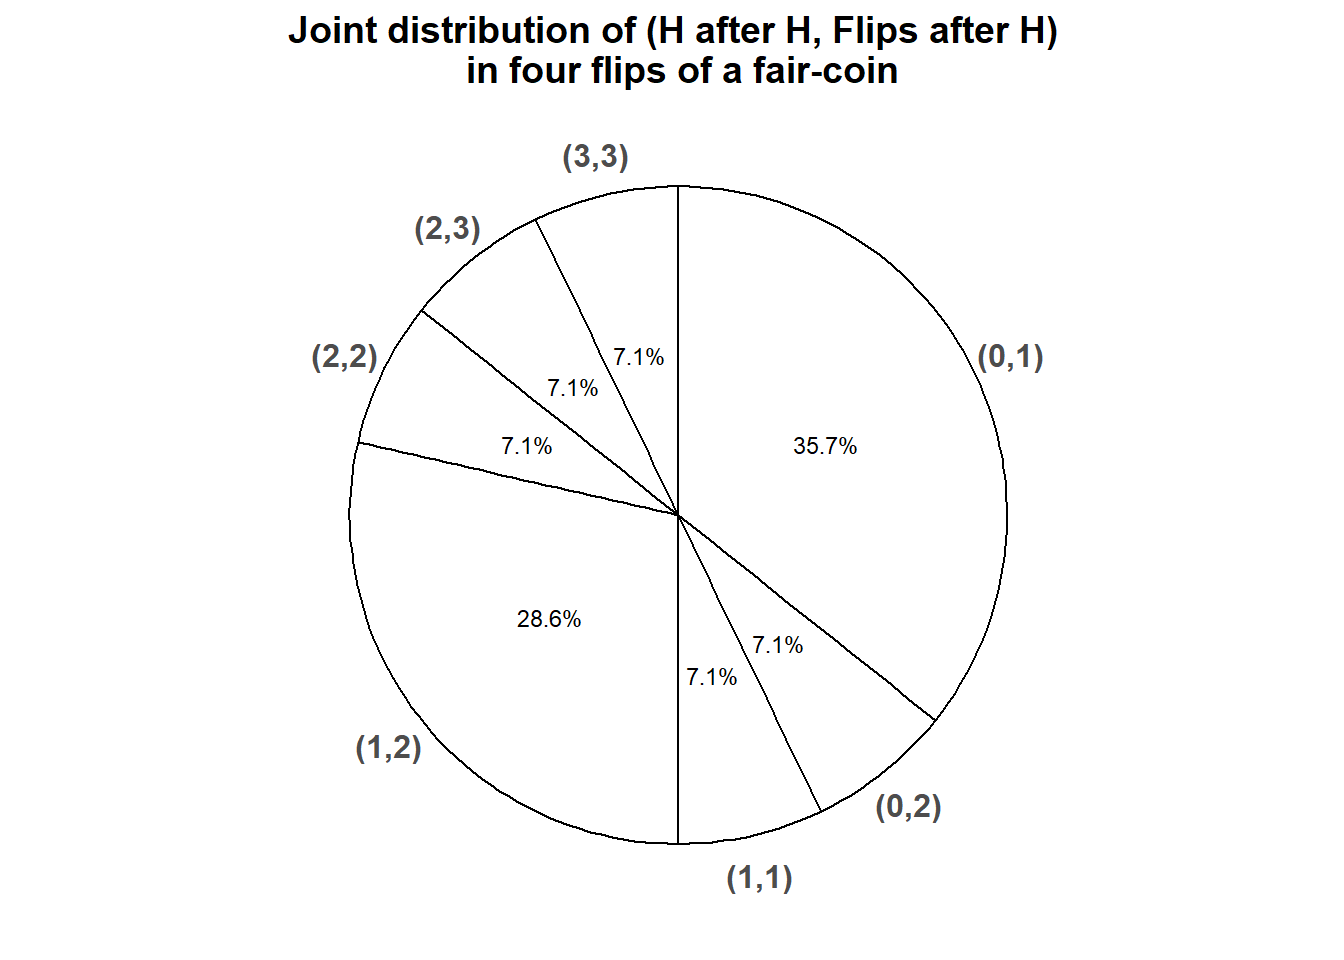 Spinner representing the joint probability mass function of \((Y, Z)\) where \(Z\) is the number of flips immediately following H, and \(Y\) is the number of flips immediately following H that result in H, for four flips of a fair coin.